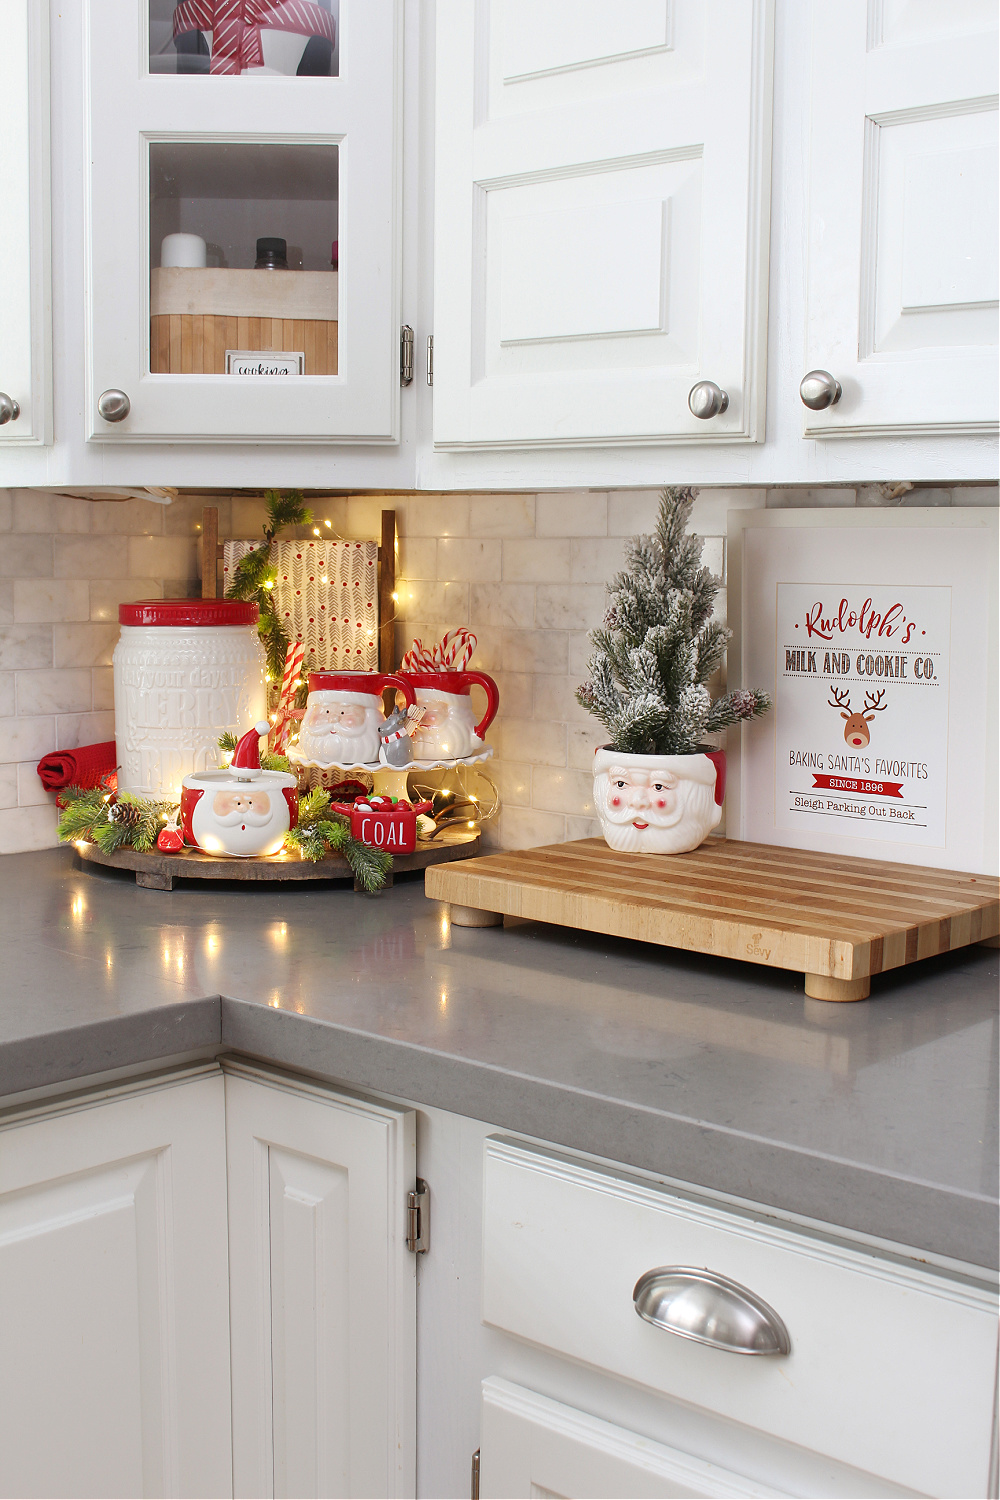 Shopping Candy* for my first home.: Inspiration  Kitchen decor sets,  Cottage kitchens, Red kitchen decor